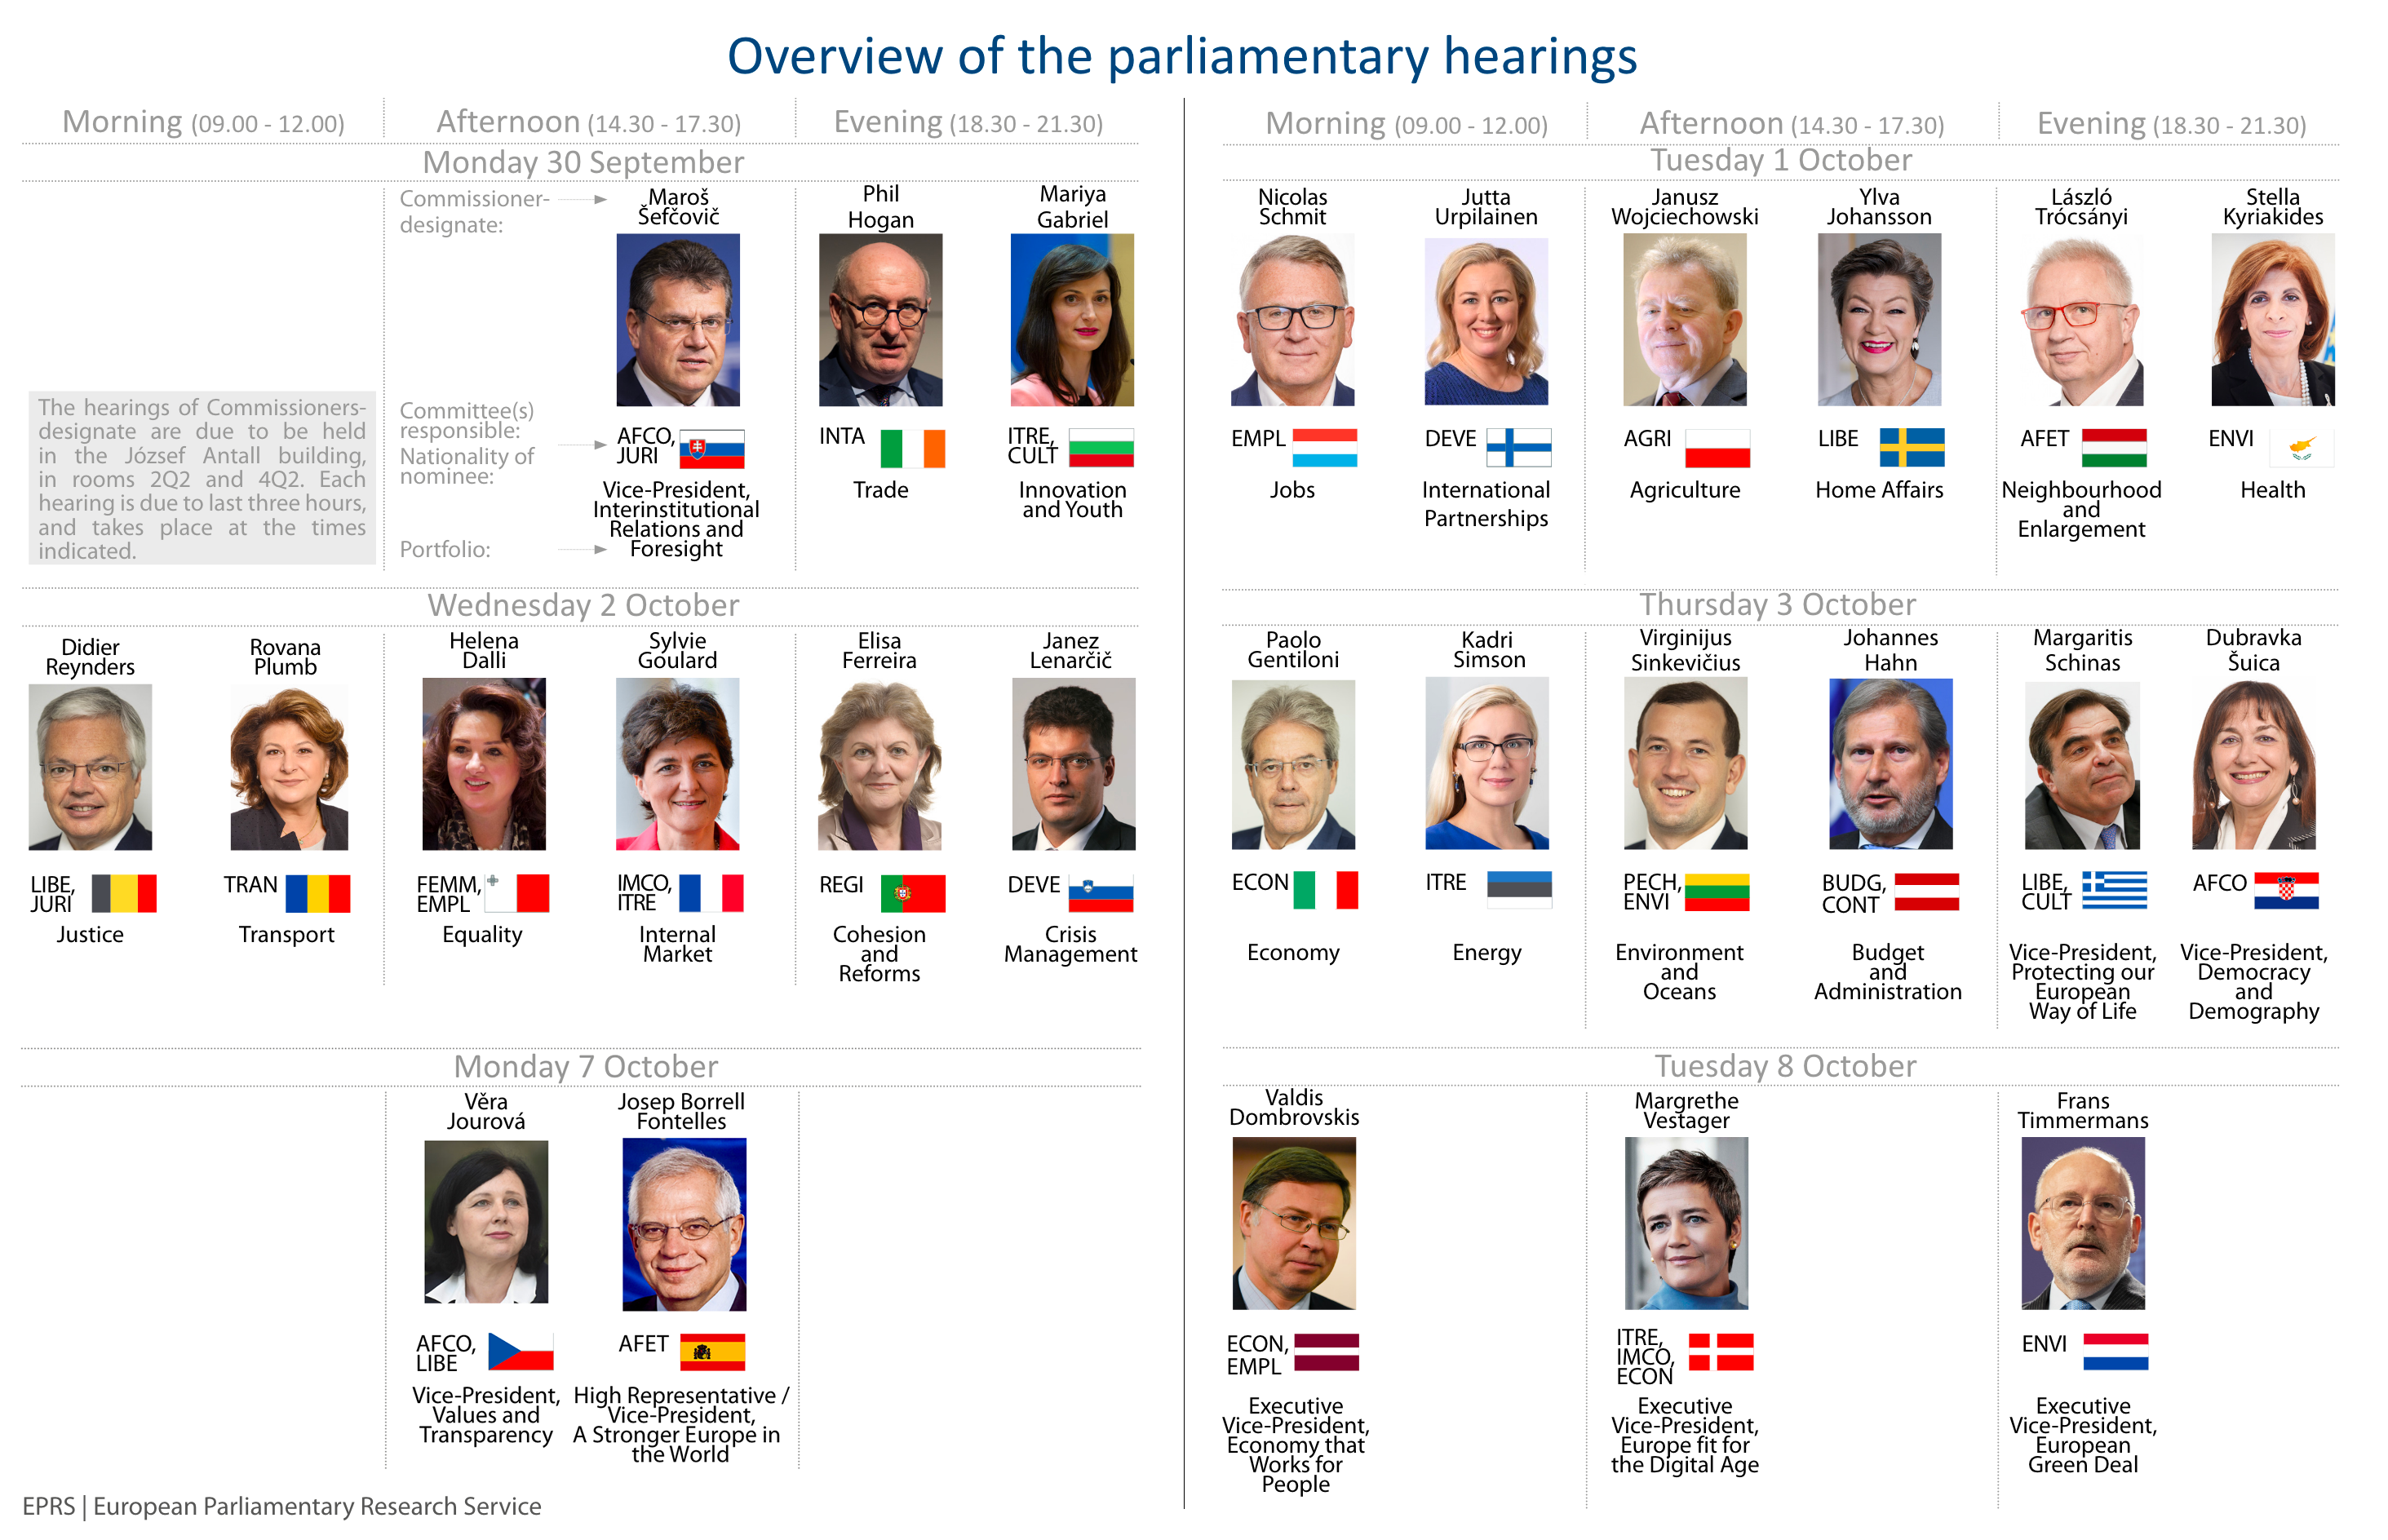 Overview of the parliamentary hearings